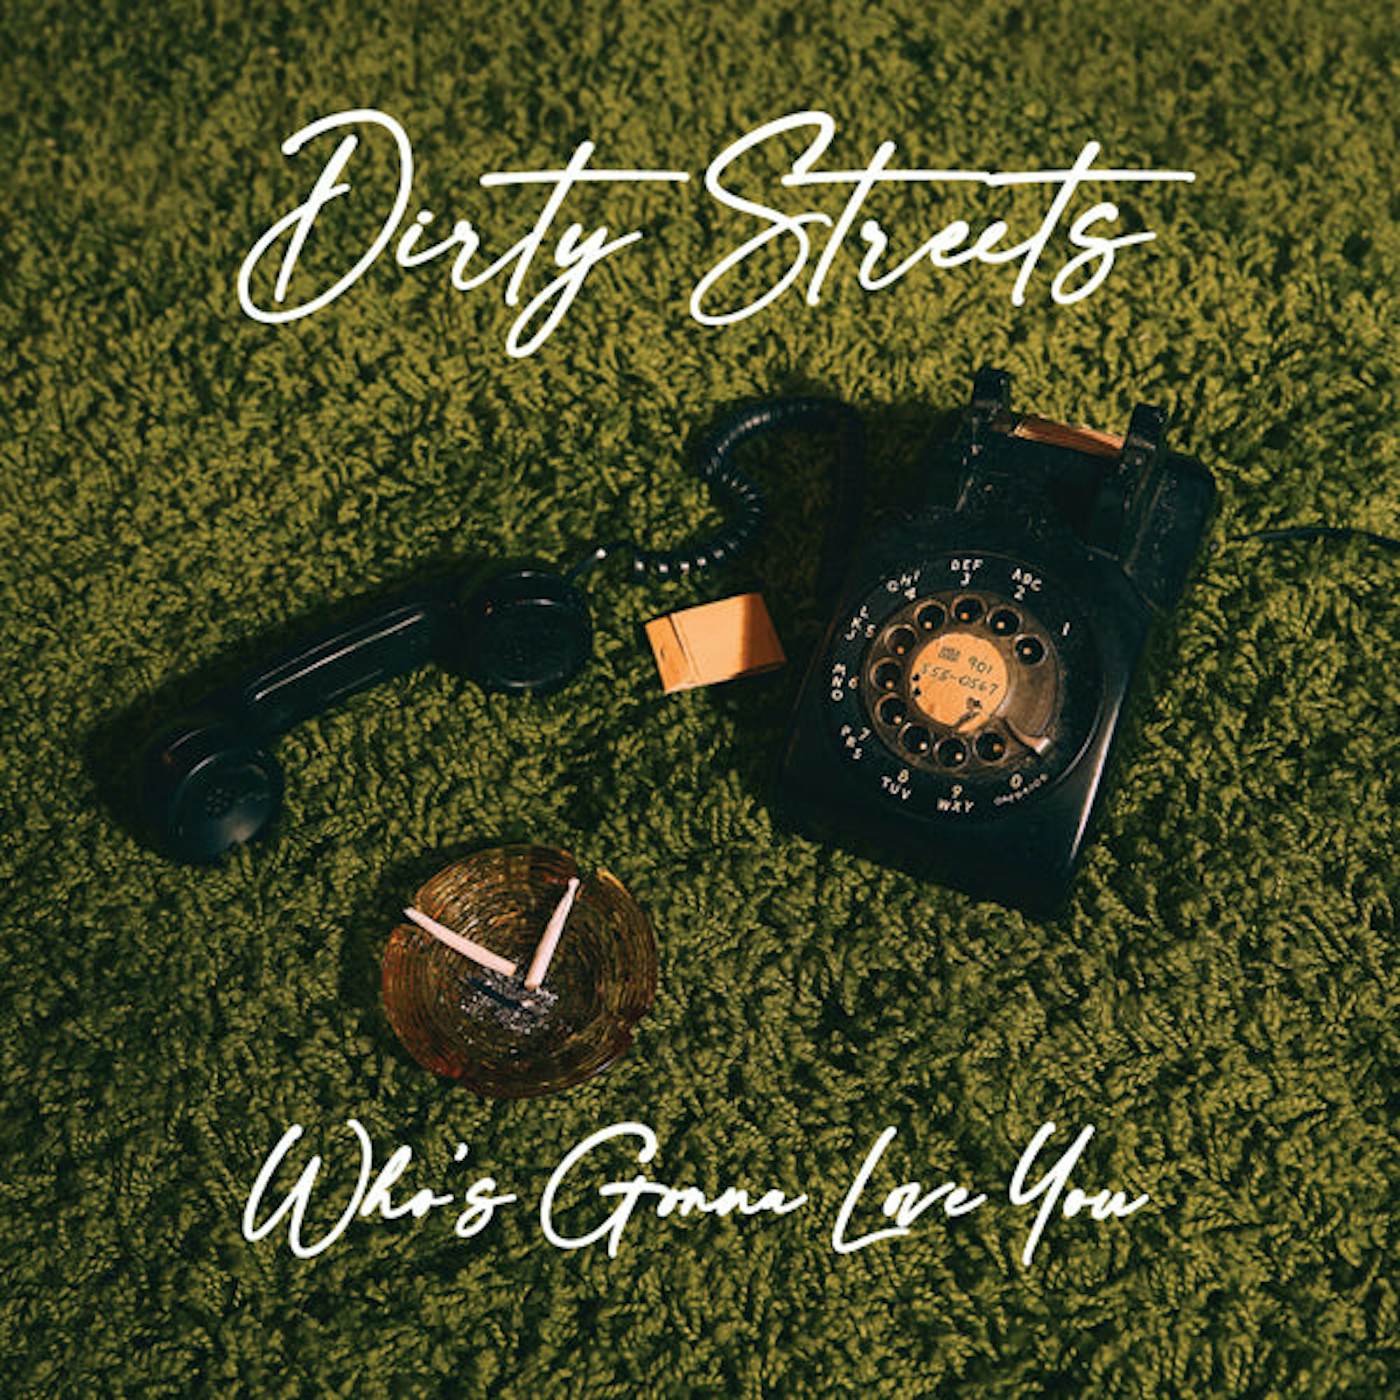 Dirty Streets LP - Who'S Gonna Love You? (Vinyl)